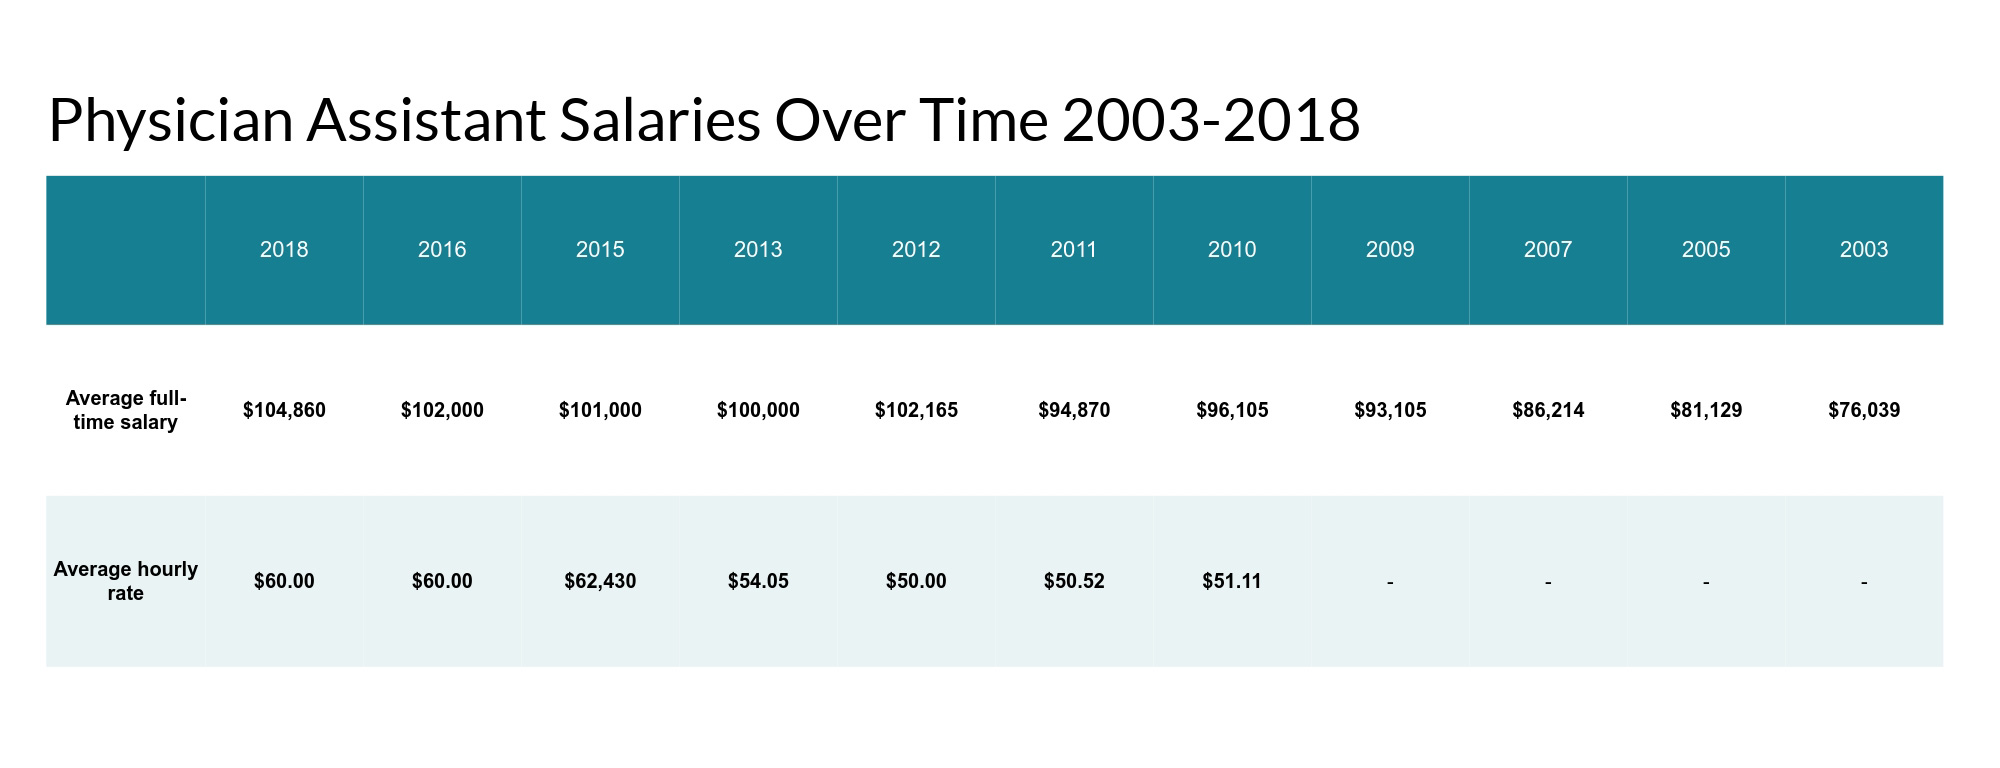 Physician Assistant Salaries Over Time 2003-2018